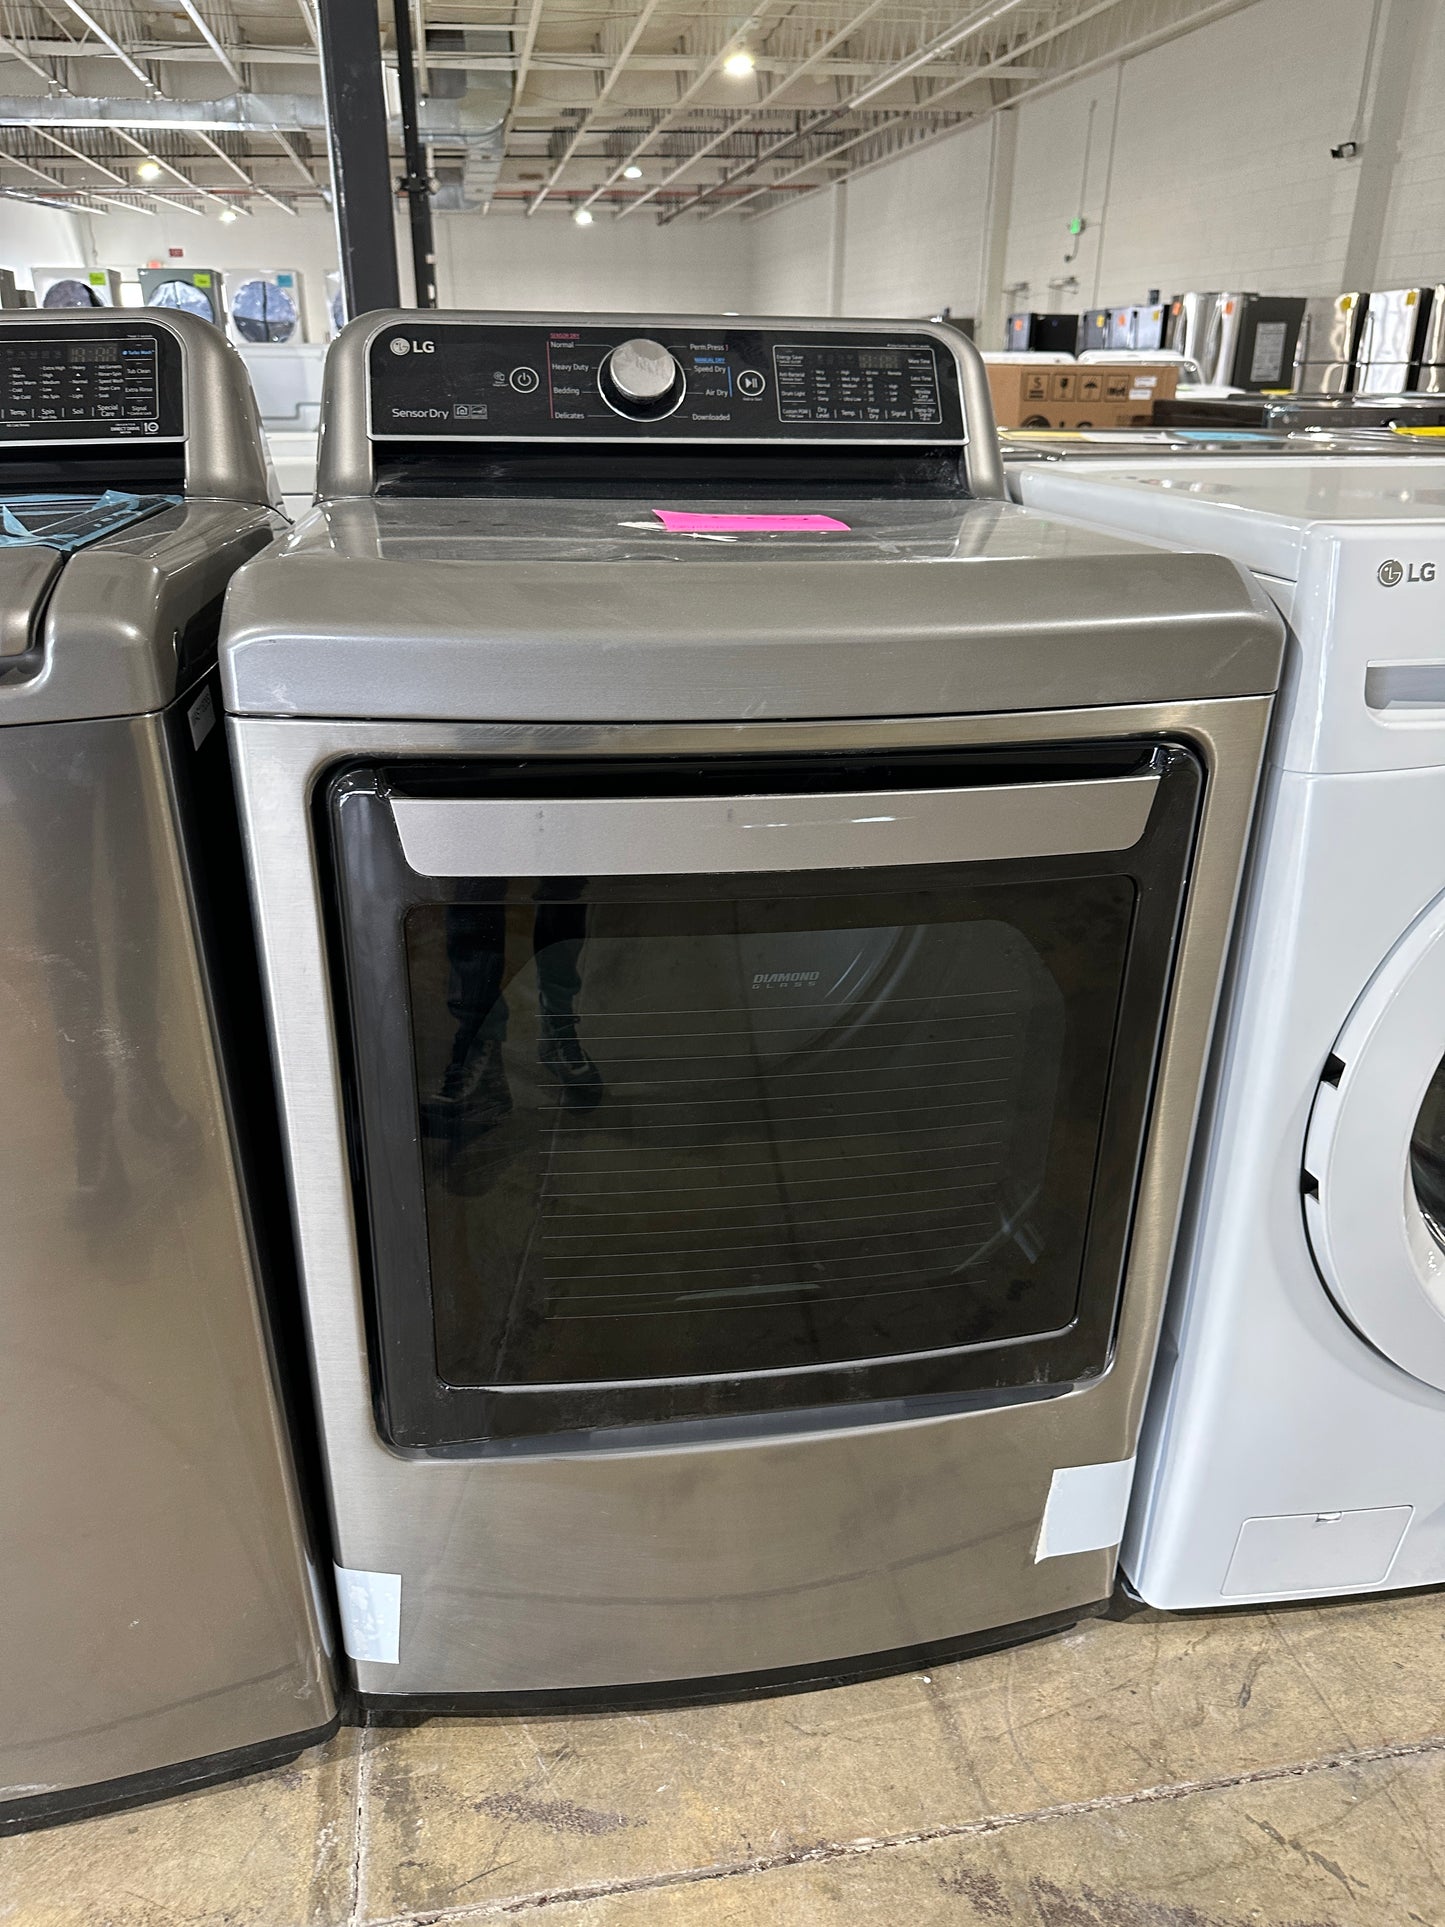 BRAND NEW ELECTRIC LG DRYER - DRY11545S DLE7300VE